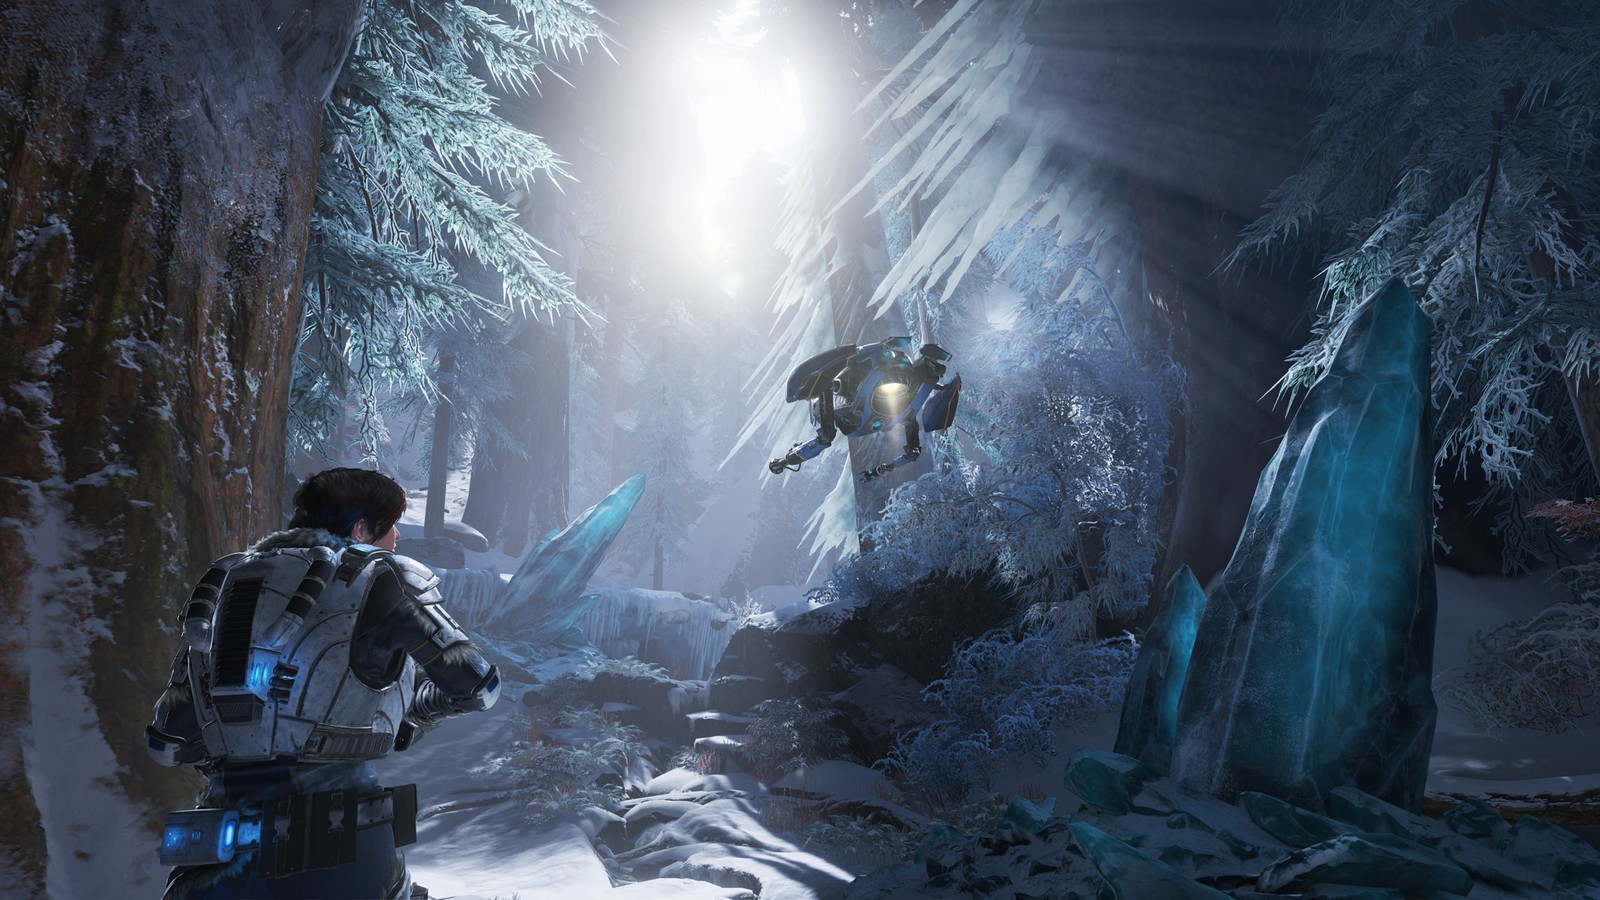 TEST : on a terminé Gears 5 en coop blog jeux video lageekroom The Coalition